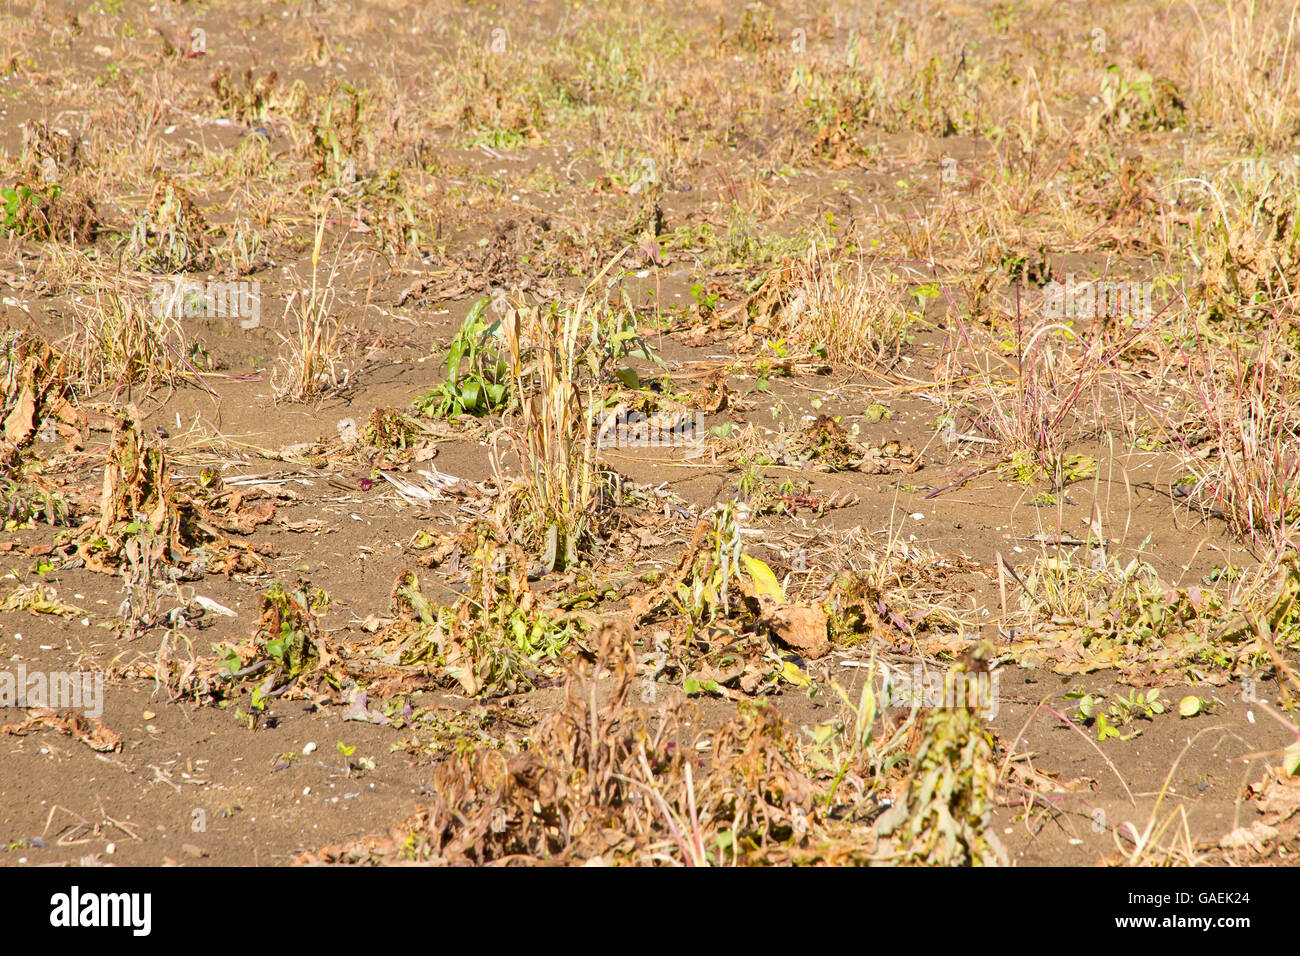 Dry field with withered plants Stock Photo